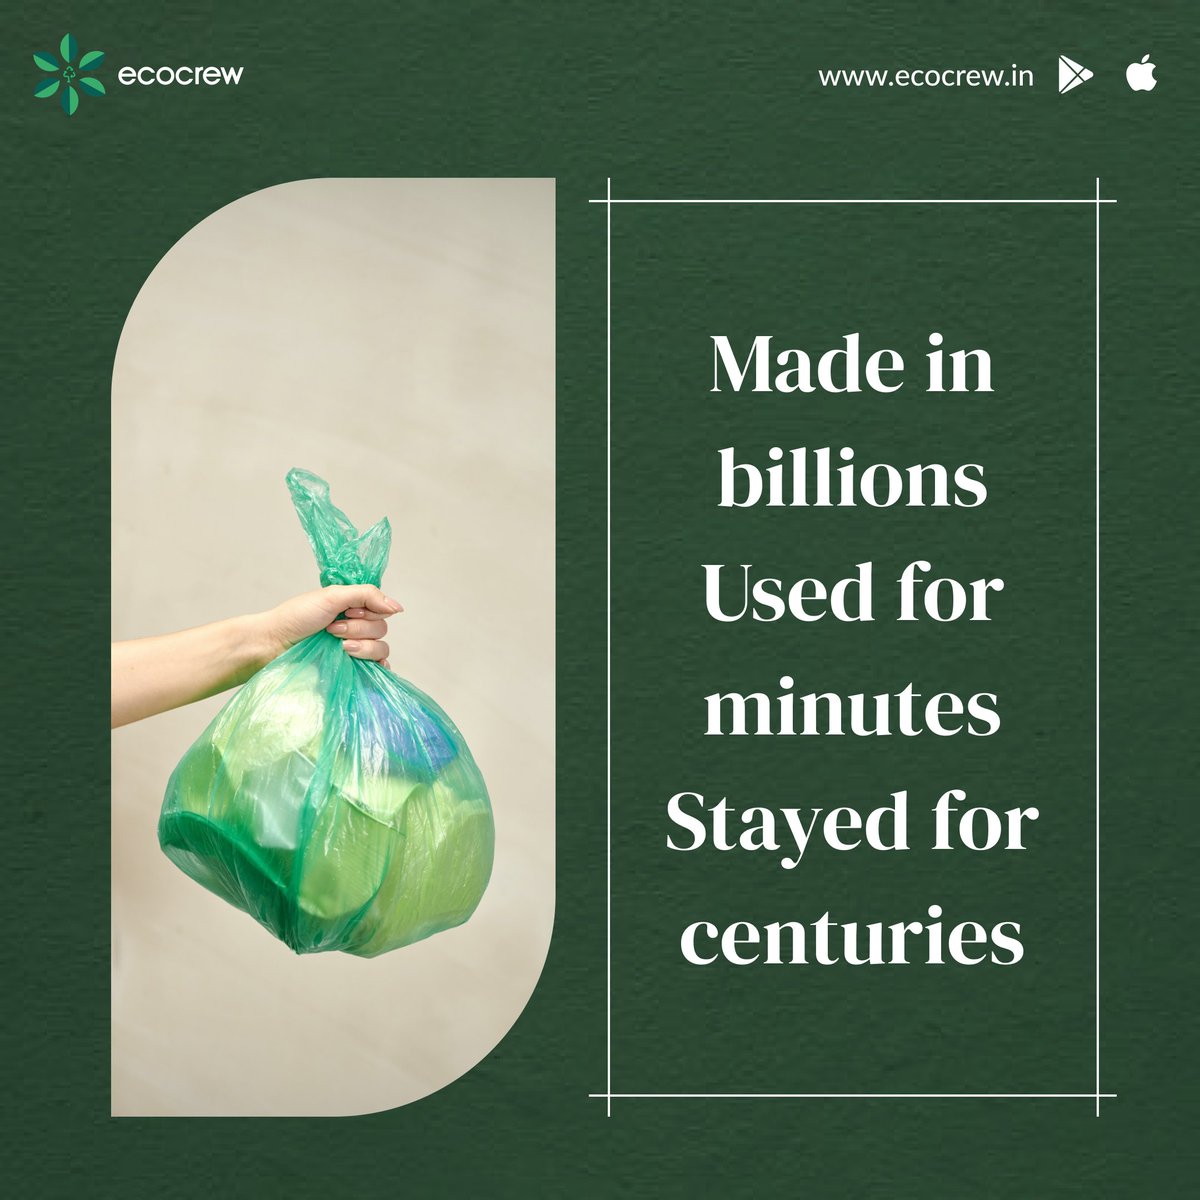 Plastic: Made in billions, Used for minutes, Stayed for centuries. Let's break this cycle and choose a sustainable future. ♻️
#plasticfreeliving #sustainableliving #plasticocean #anujramatri #love #reduce #plasticsurgery #bengaluru #vanimurthy #saynotoplastic #garbage